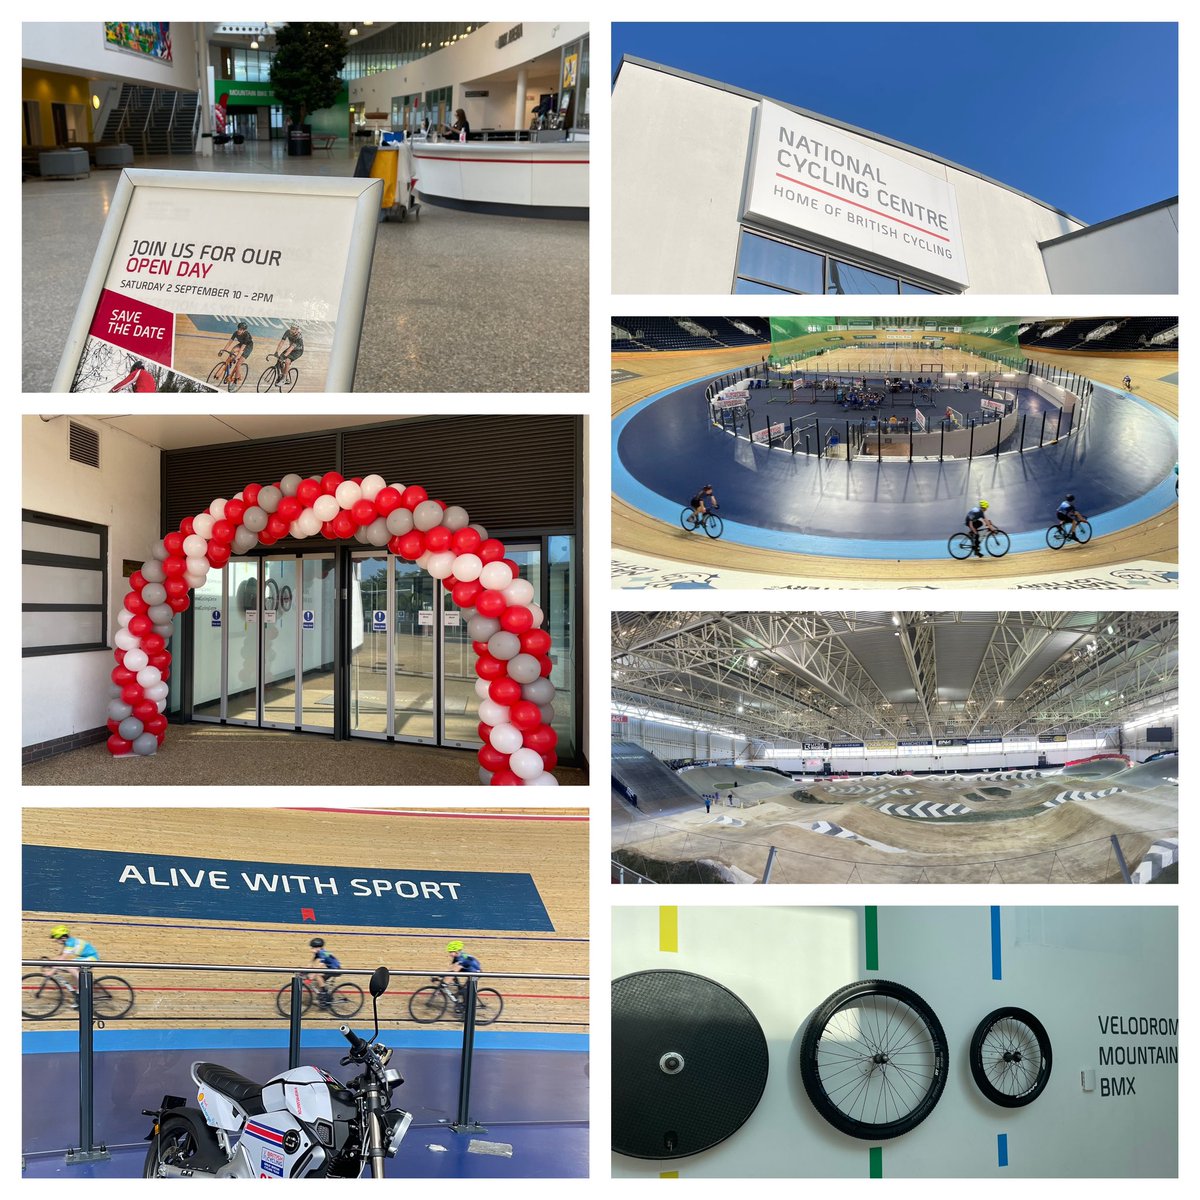 Lovely buzz of activity already @N_CyclingCentre ahead of our open day celebrating multi-million investment from @ManCityCouncil @Sport_England & central government. Plenty of demo and have a go sessions on velodrome & BMX track @BritishCycling @LisaDoddMayne @hacking4chorlton